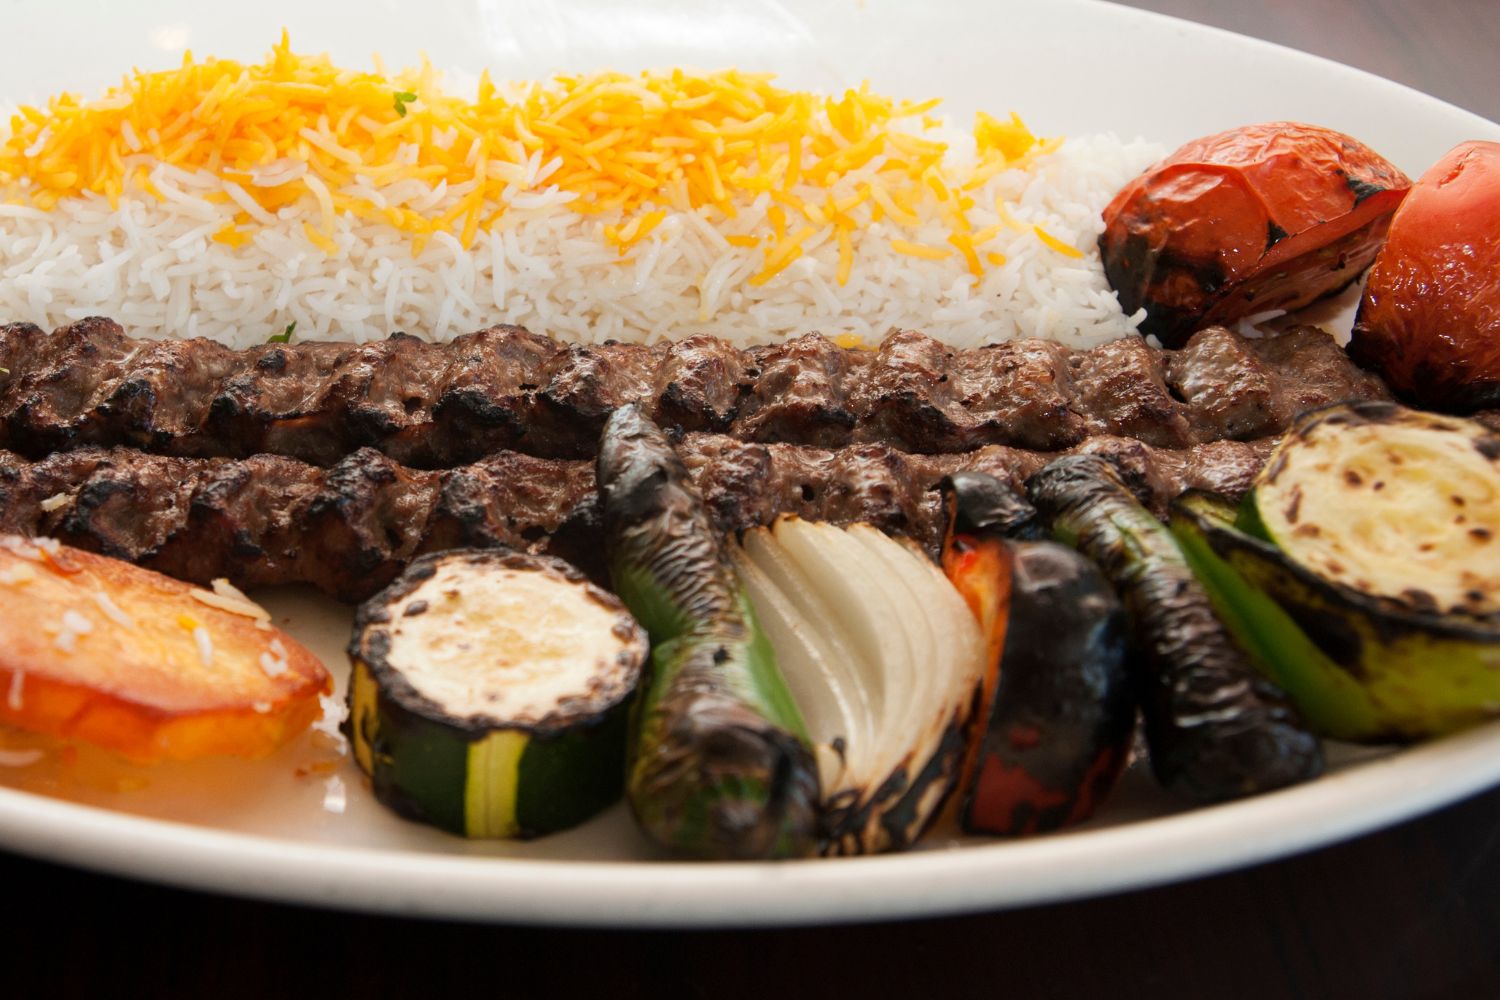 Iran Culture and Customs » All you need to know Food from Iran